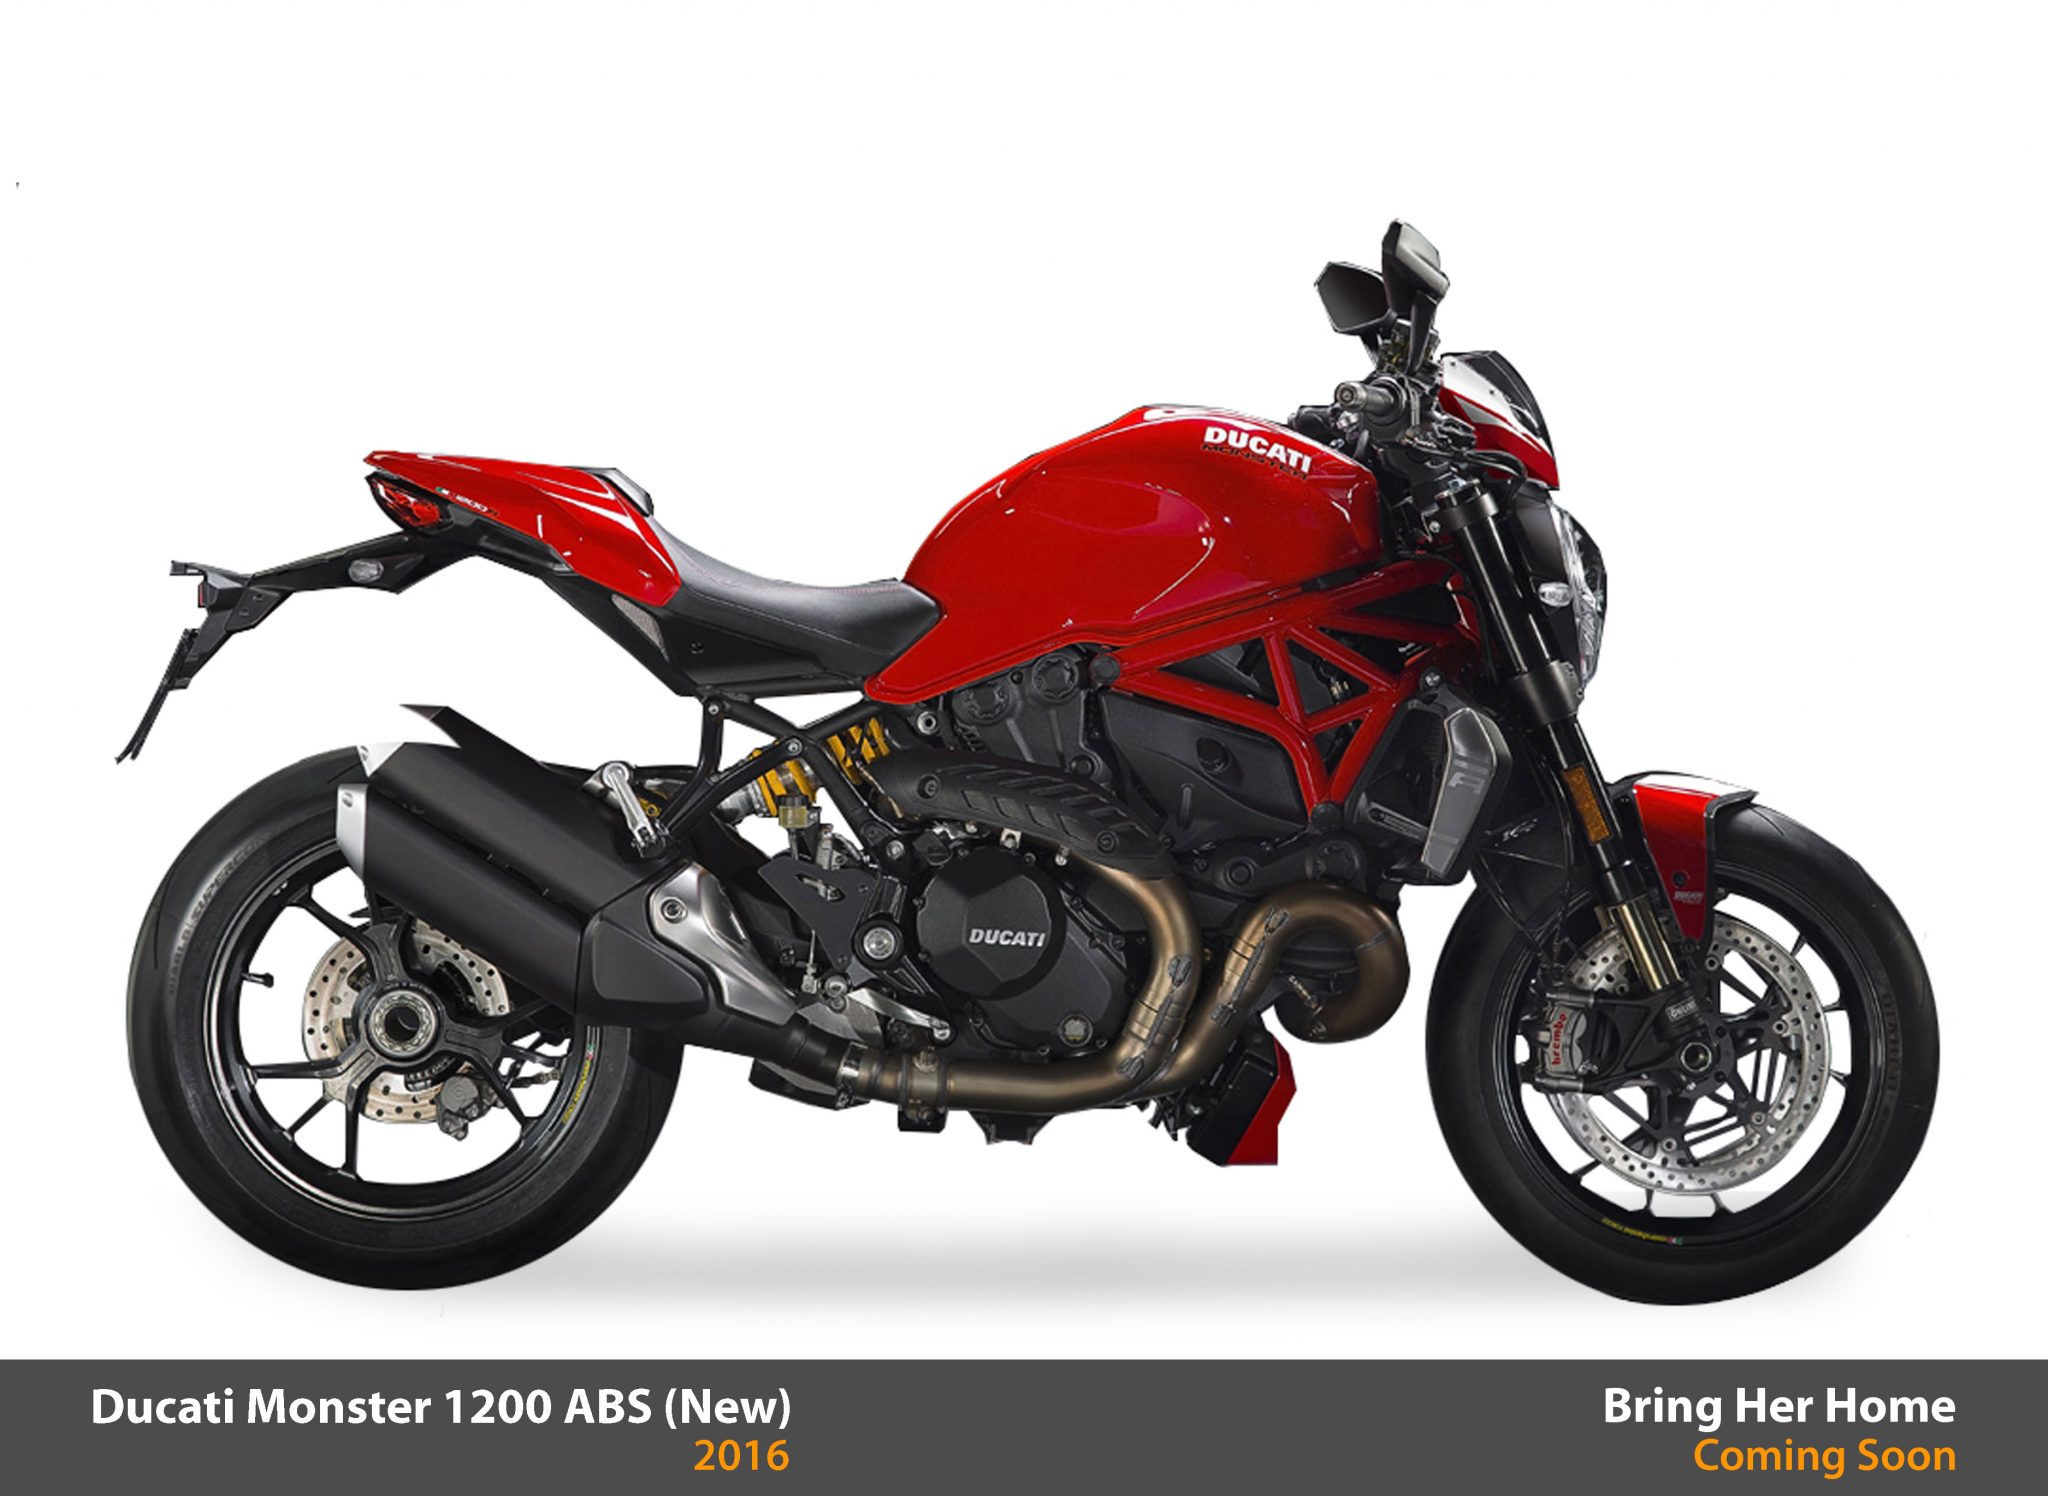 DUCATI MONSTER 1200 ABS PARTS